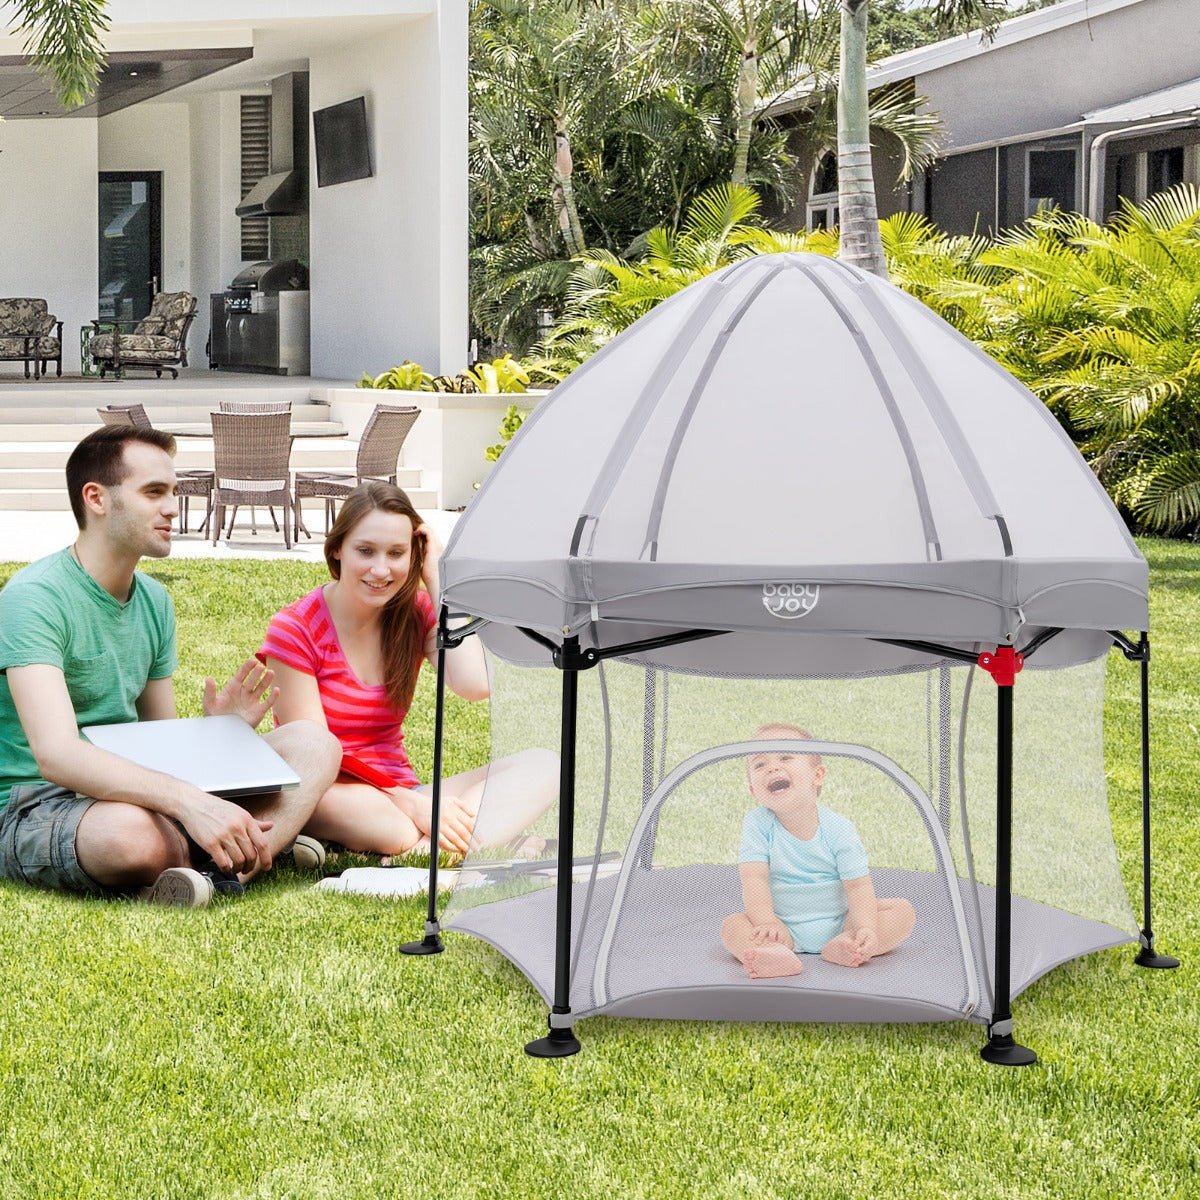 Gray Portable Baby Playpen: Removable Canopy for Indoor & Outdoor Fun